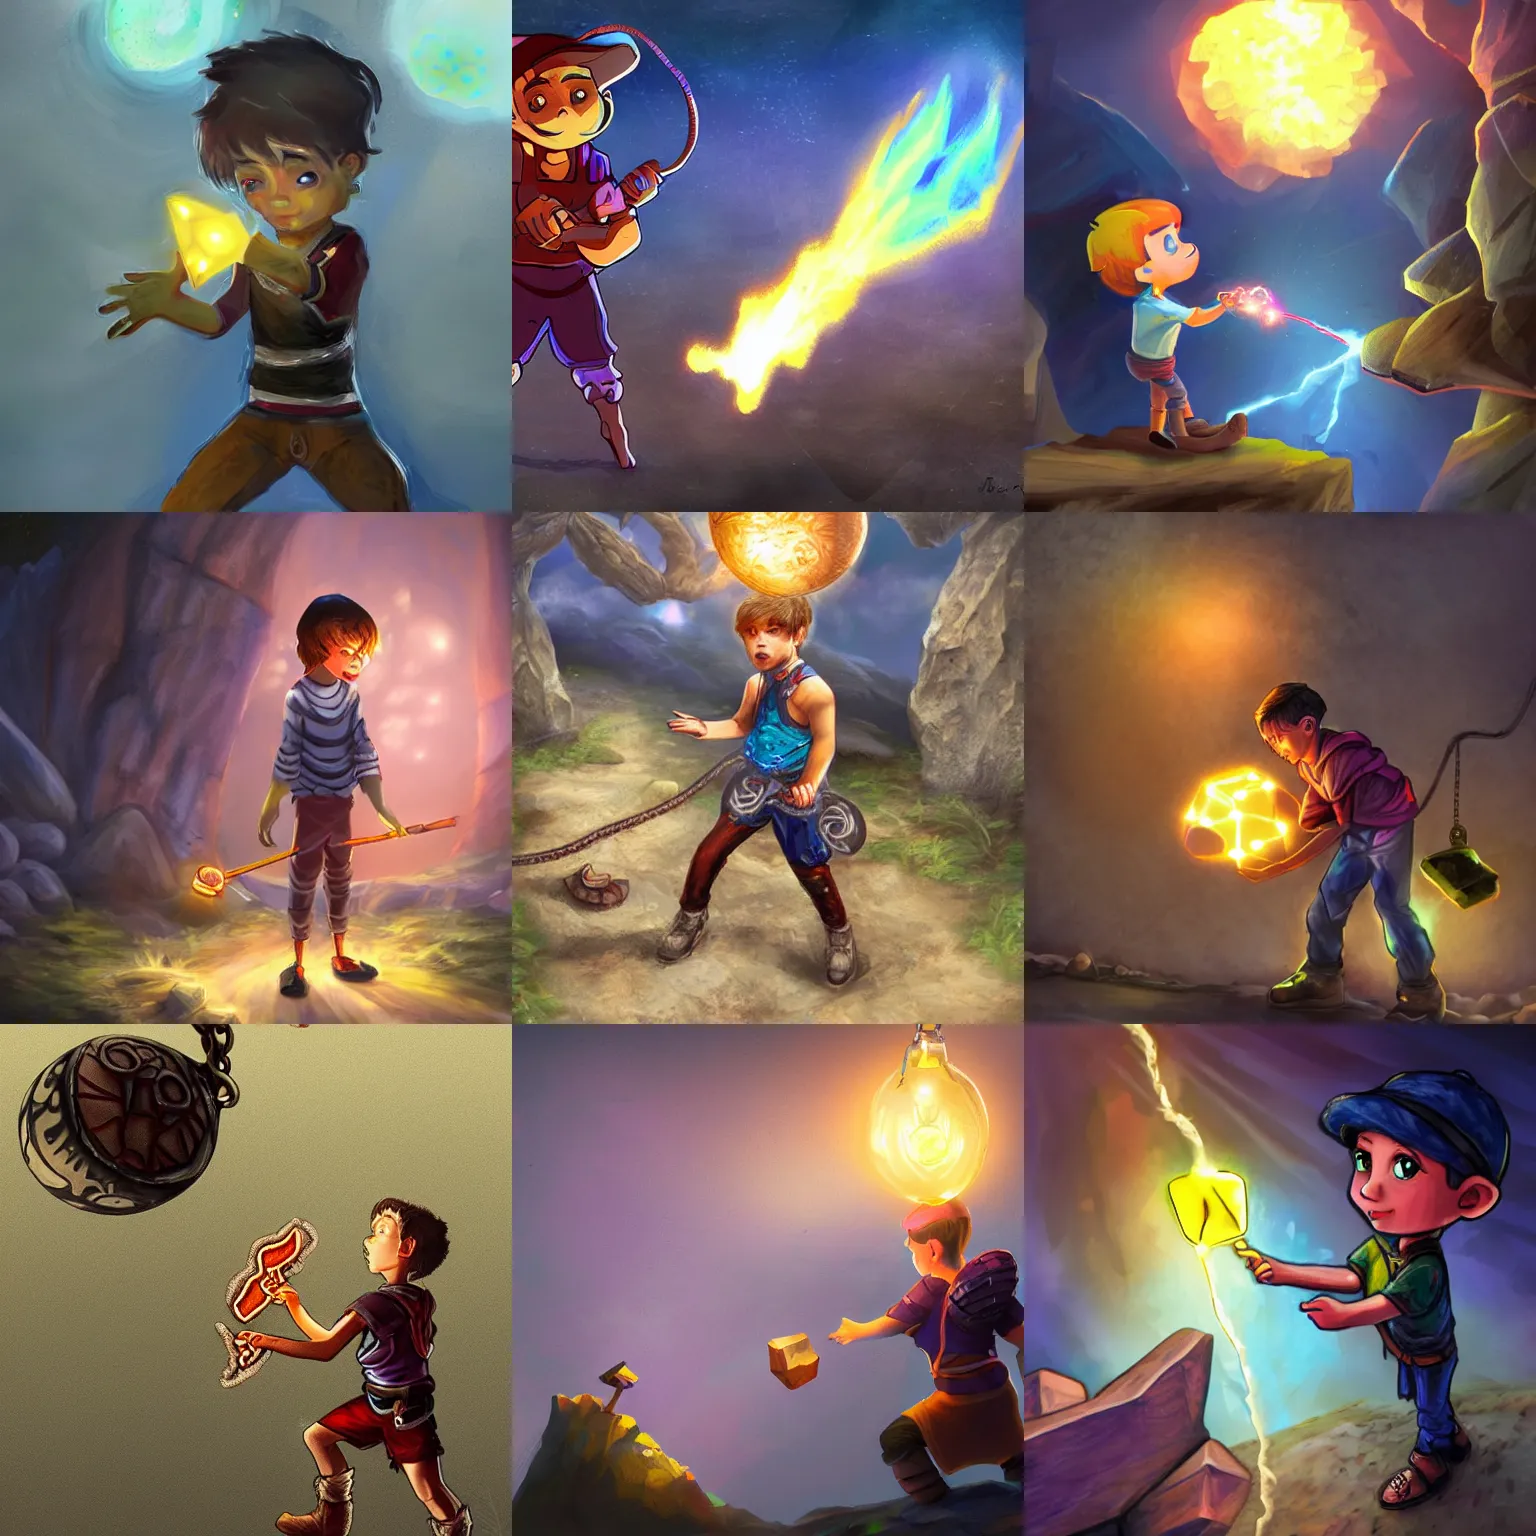 Prompt: A young breaker boy on the line stealing a piece of glowing ore by placing it inside a pendant, fantasy art style